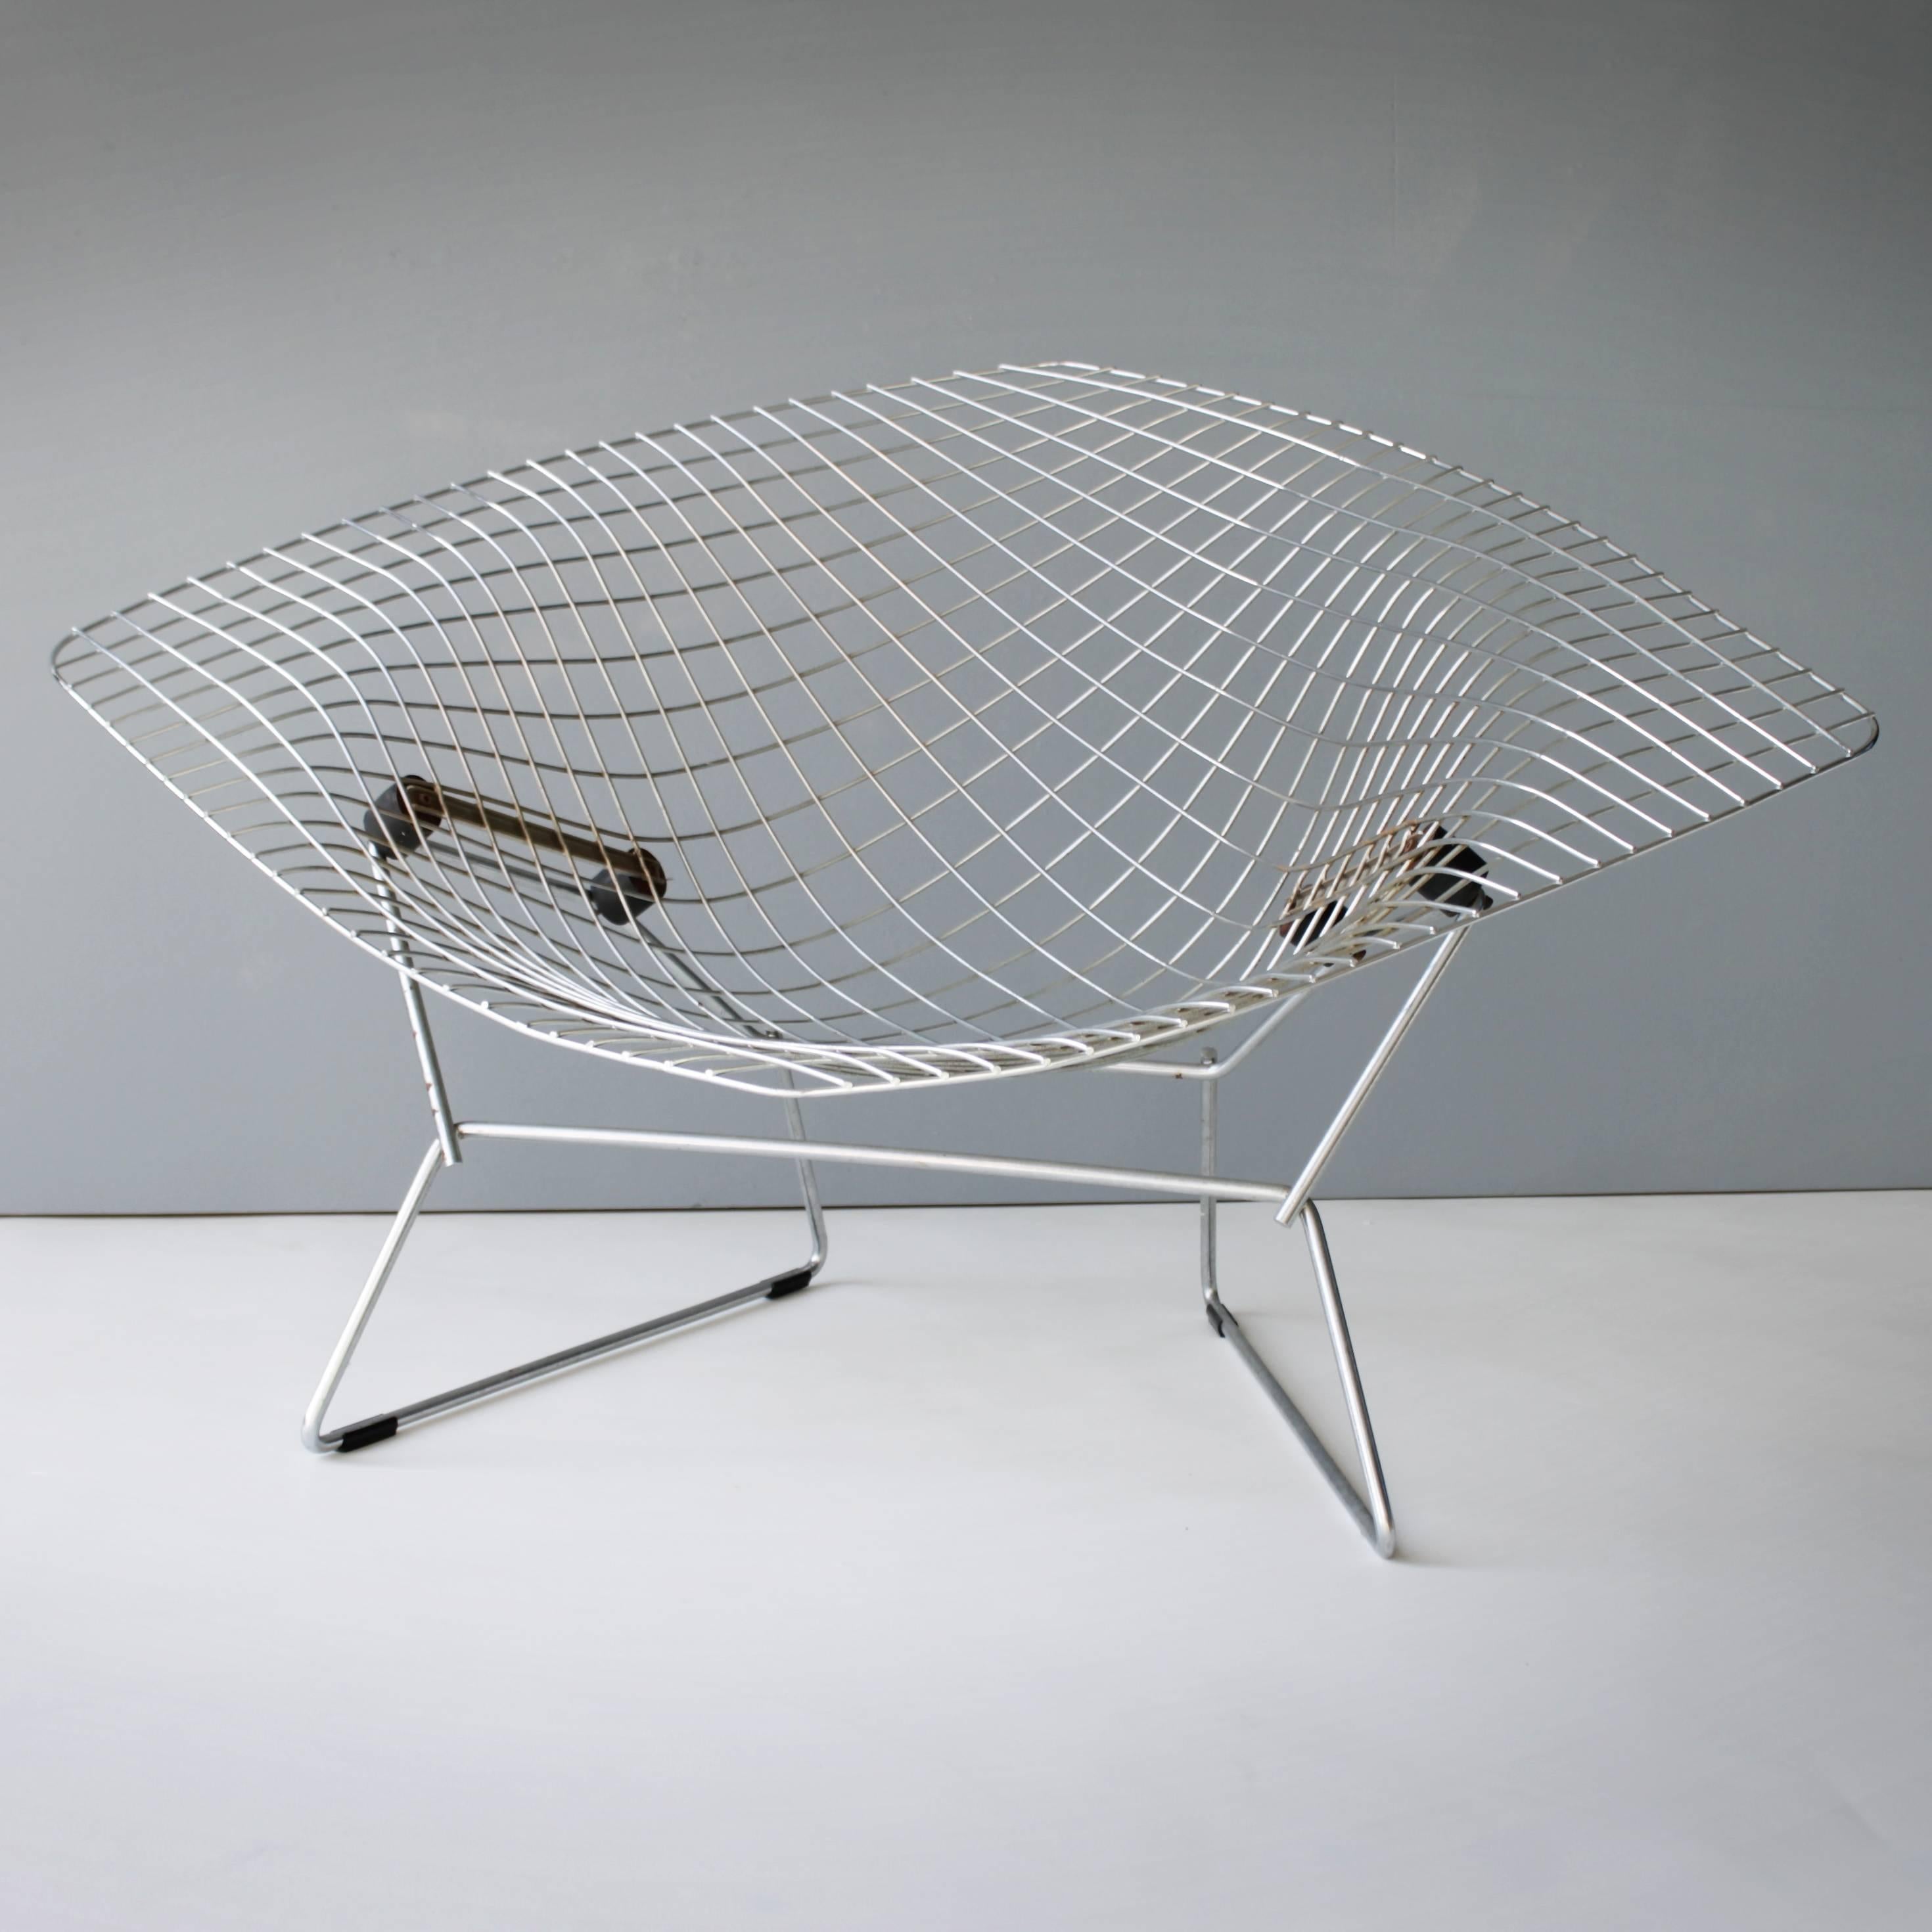 Early large Diamond chair by Harry Bertoia for Knoll. Welded and chromed steel, rubber (shock mounts).

Italian-born American, Arieto ‘Harry’ Bertoia (1915-1978) was a multi talented artist. His artistic output ranges from jewelry to works in